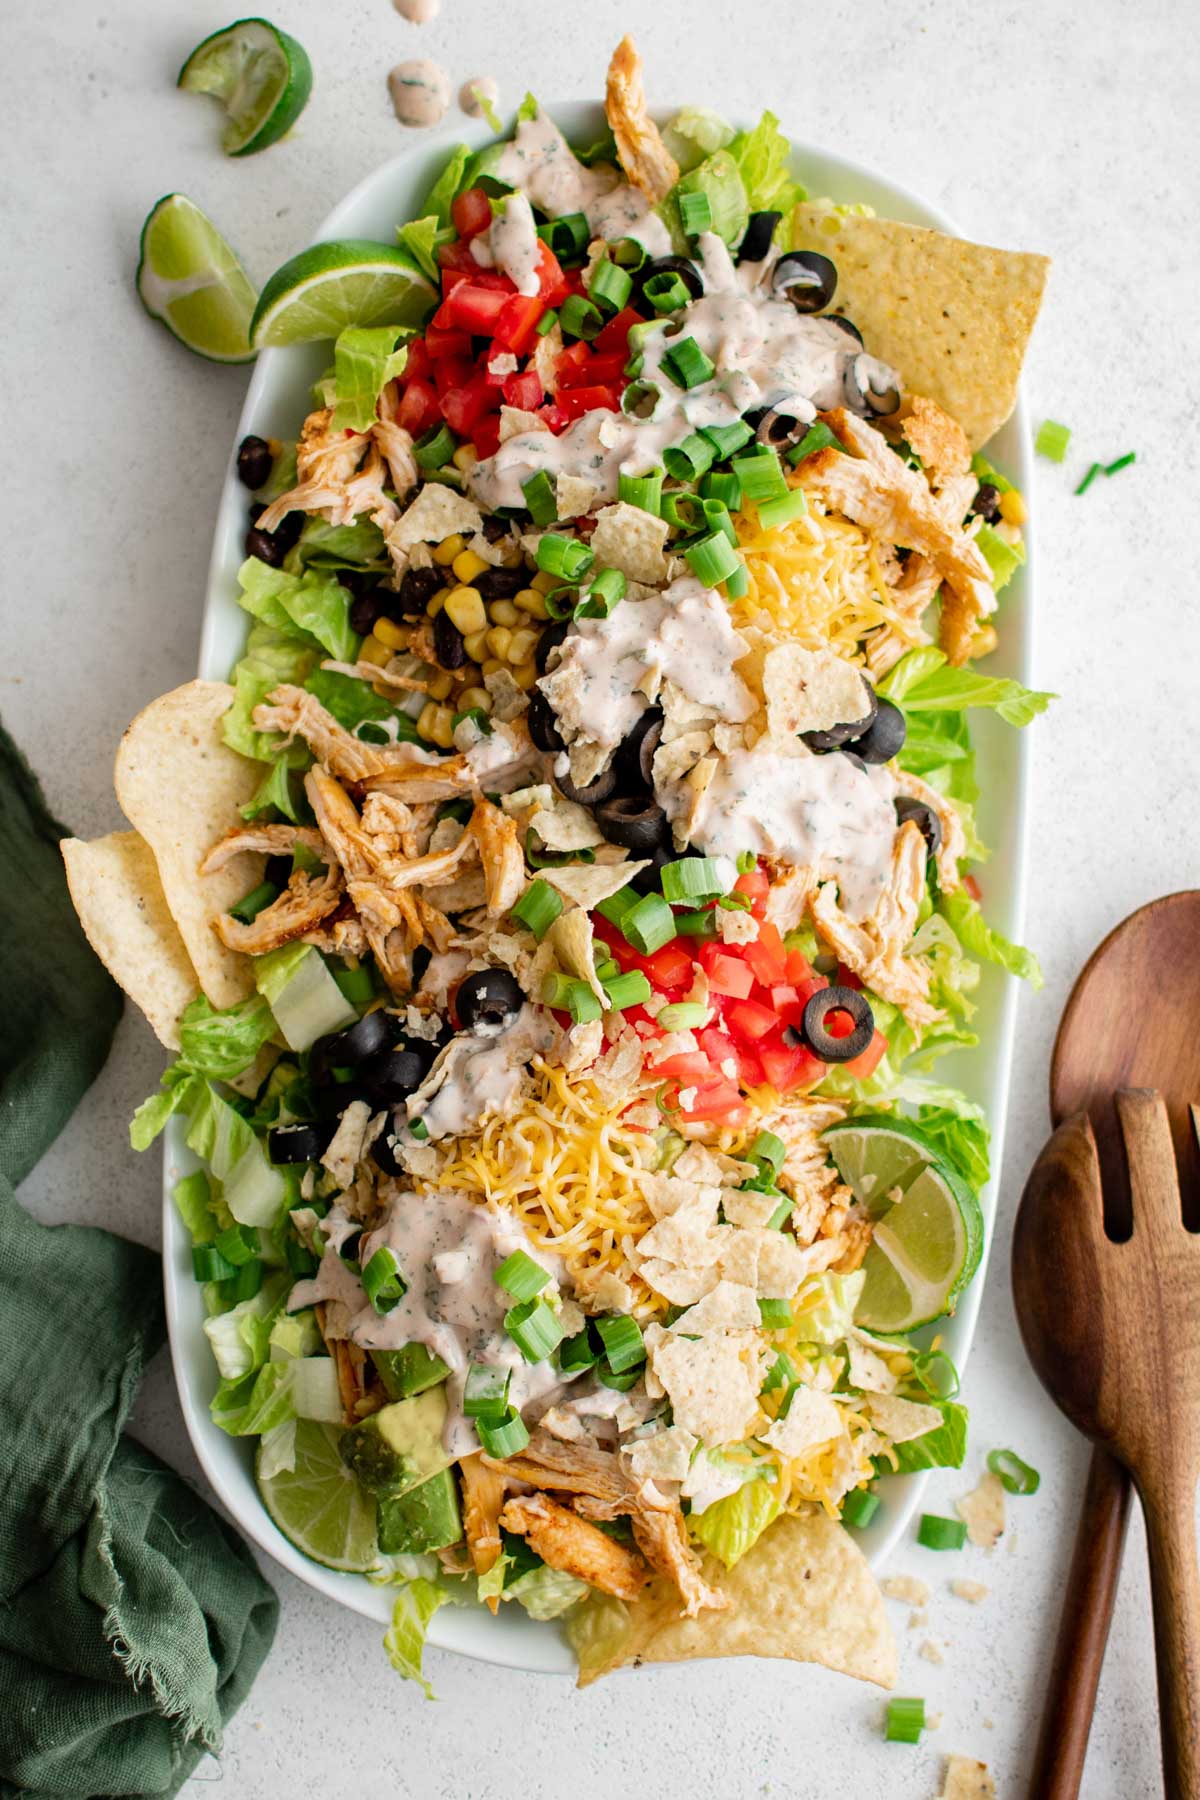 Layers of shredded romaine lettuce, tomatoes, chicken and cheese on a large white platter.